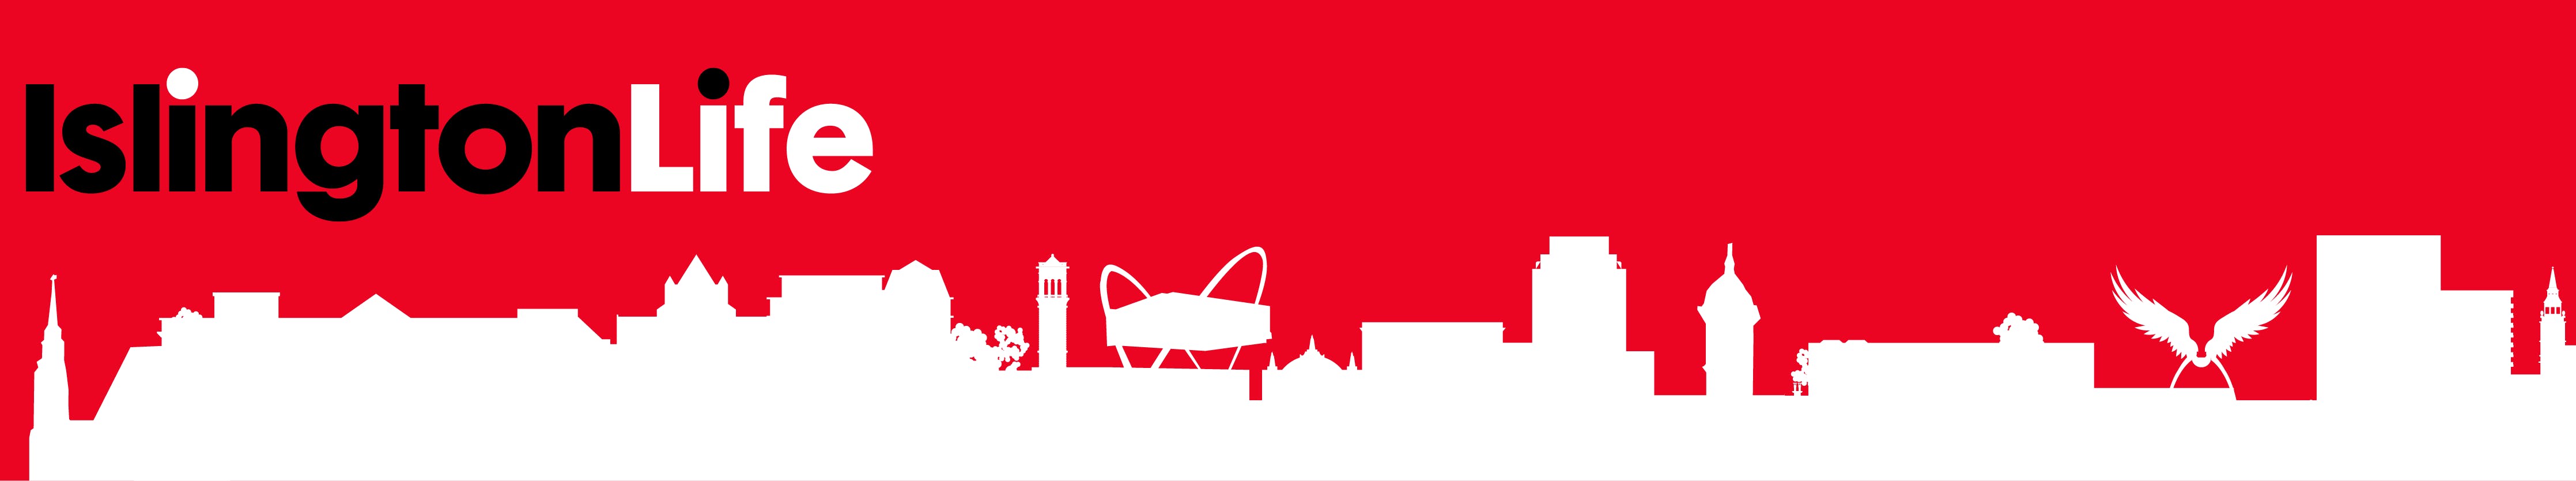 Islingtonlife header banner. A white skyline with key location in Islington on a red background